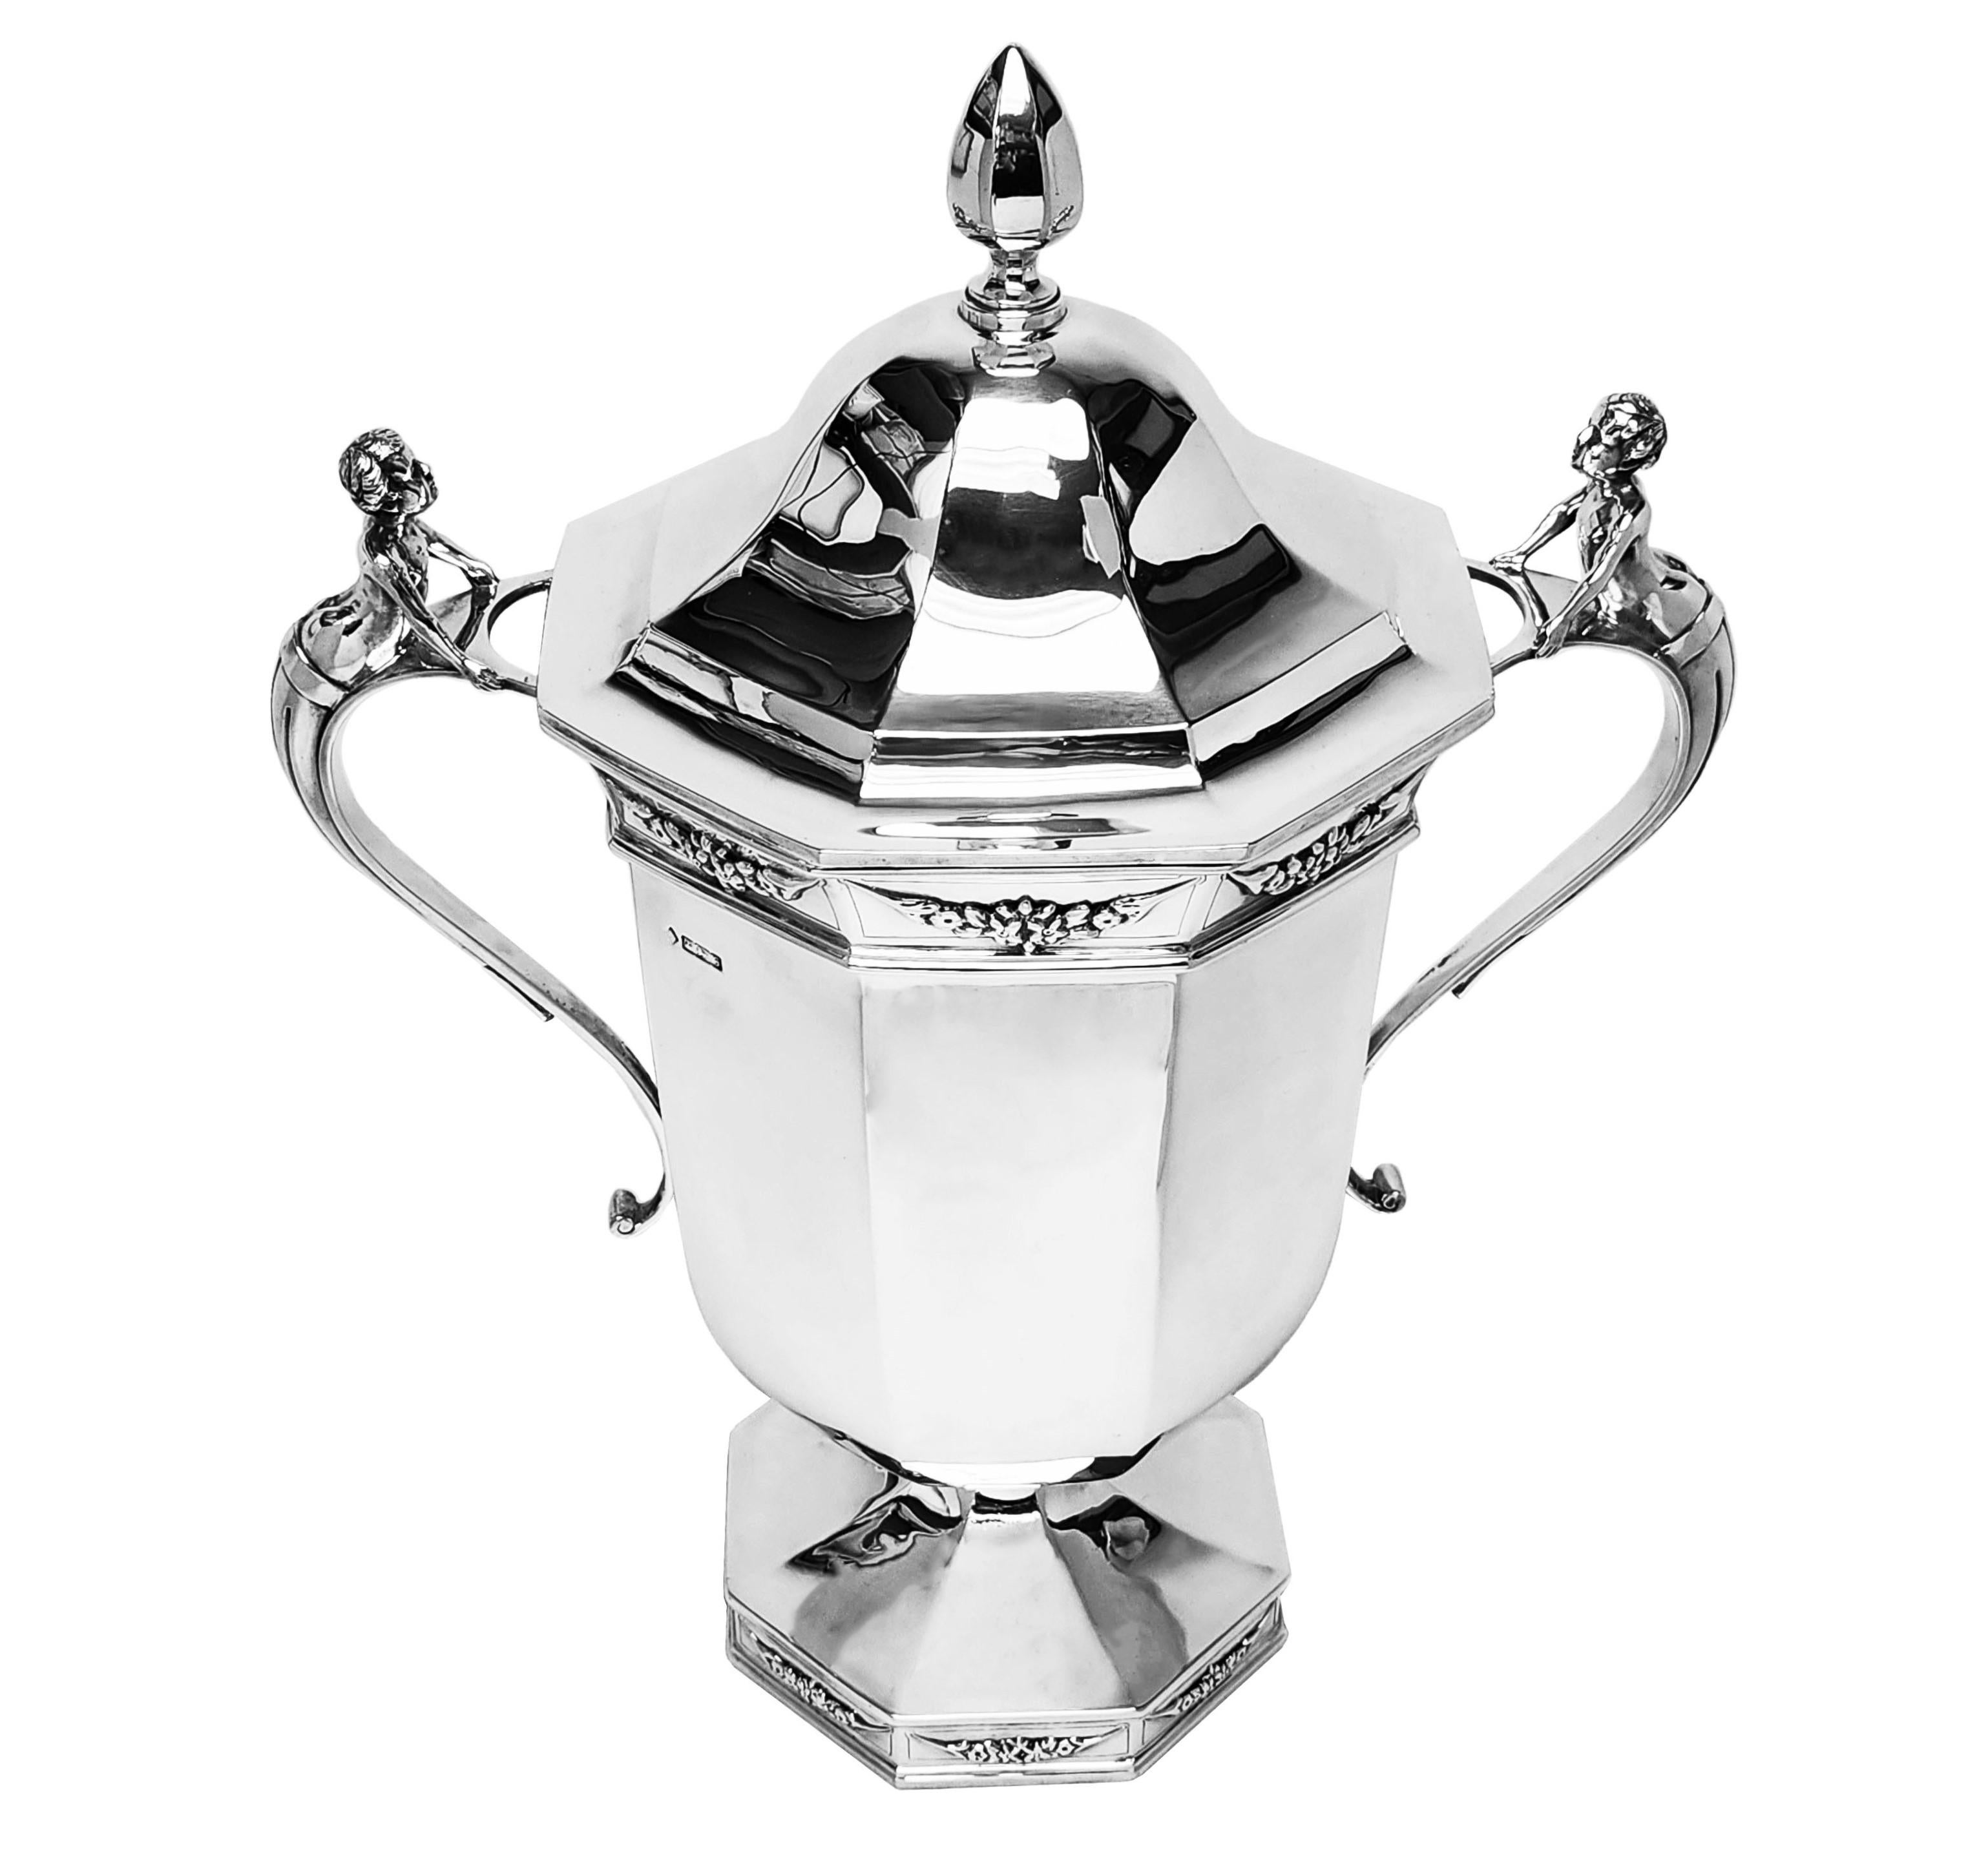 An impressive Antique Solid Silver Lidded Cup with an elegant octagonal shape. The Trophy has two impressive figural handles and has has an understated band of floral swags below the rim and on the foot. This Cup is suitable for use as a good size